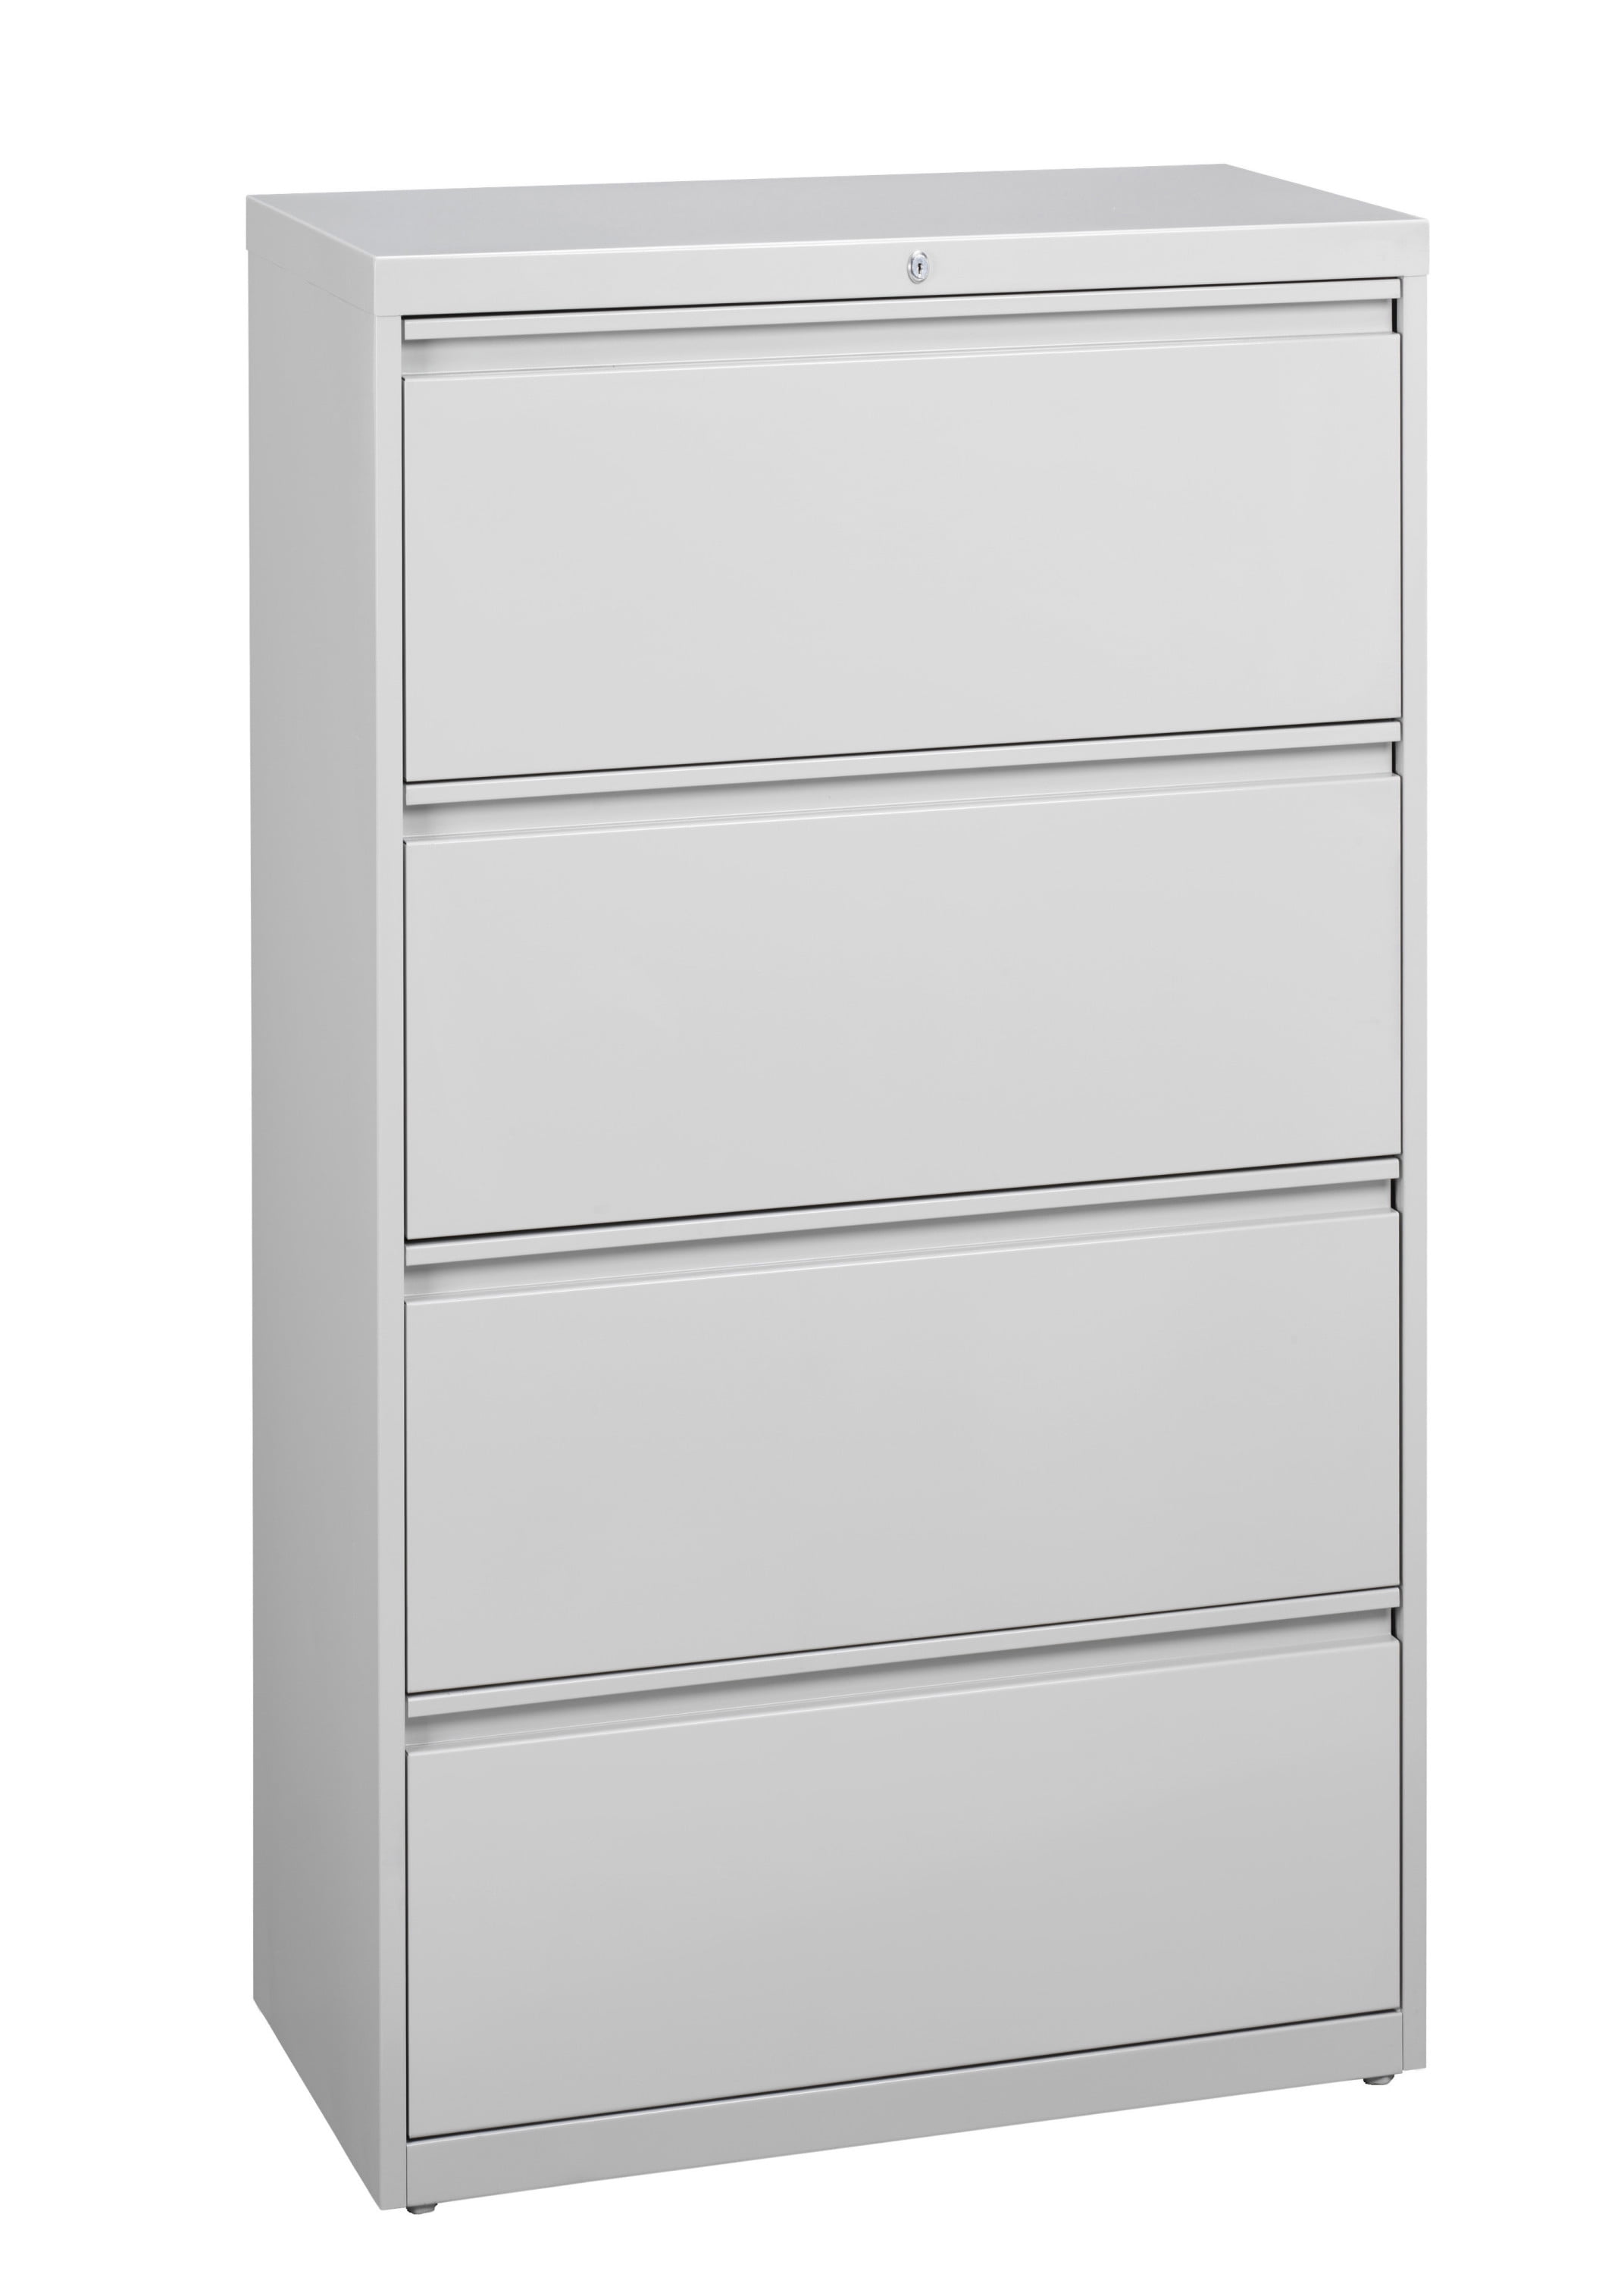 Hirsh 36 In Wide Hl8000 Series 4 Drawer Lateral File Cabinet